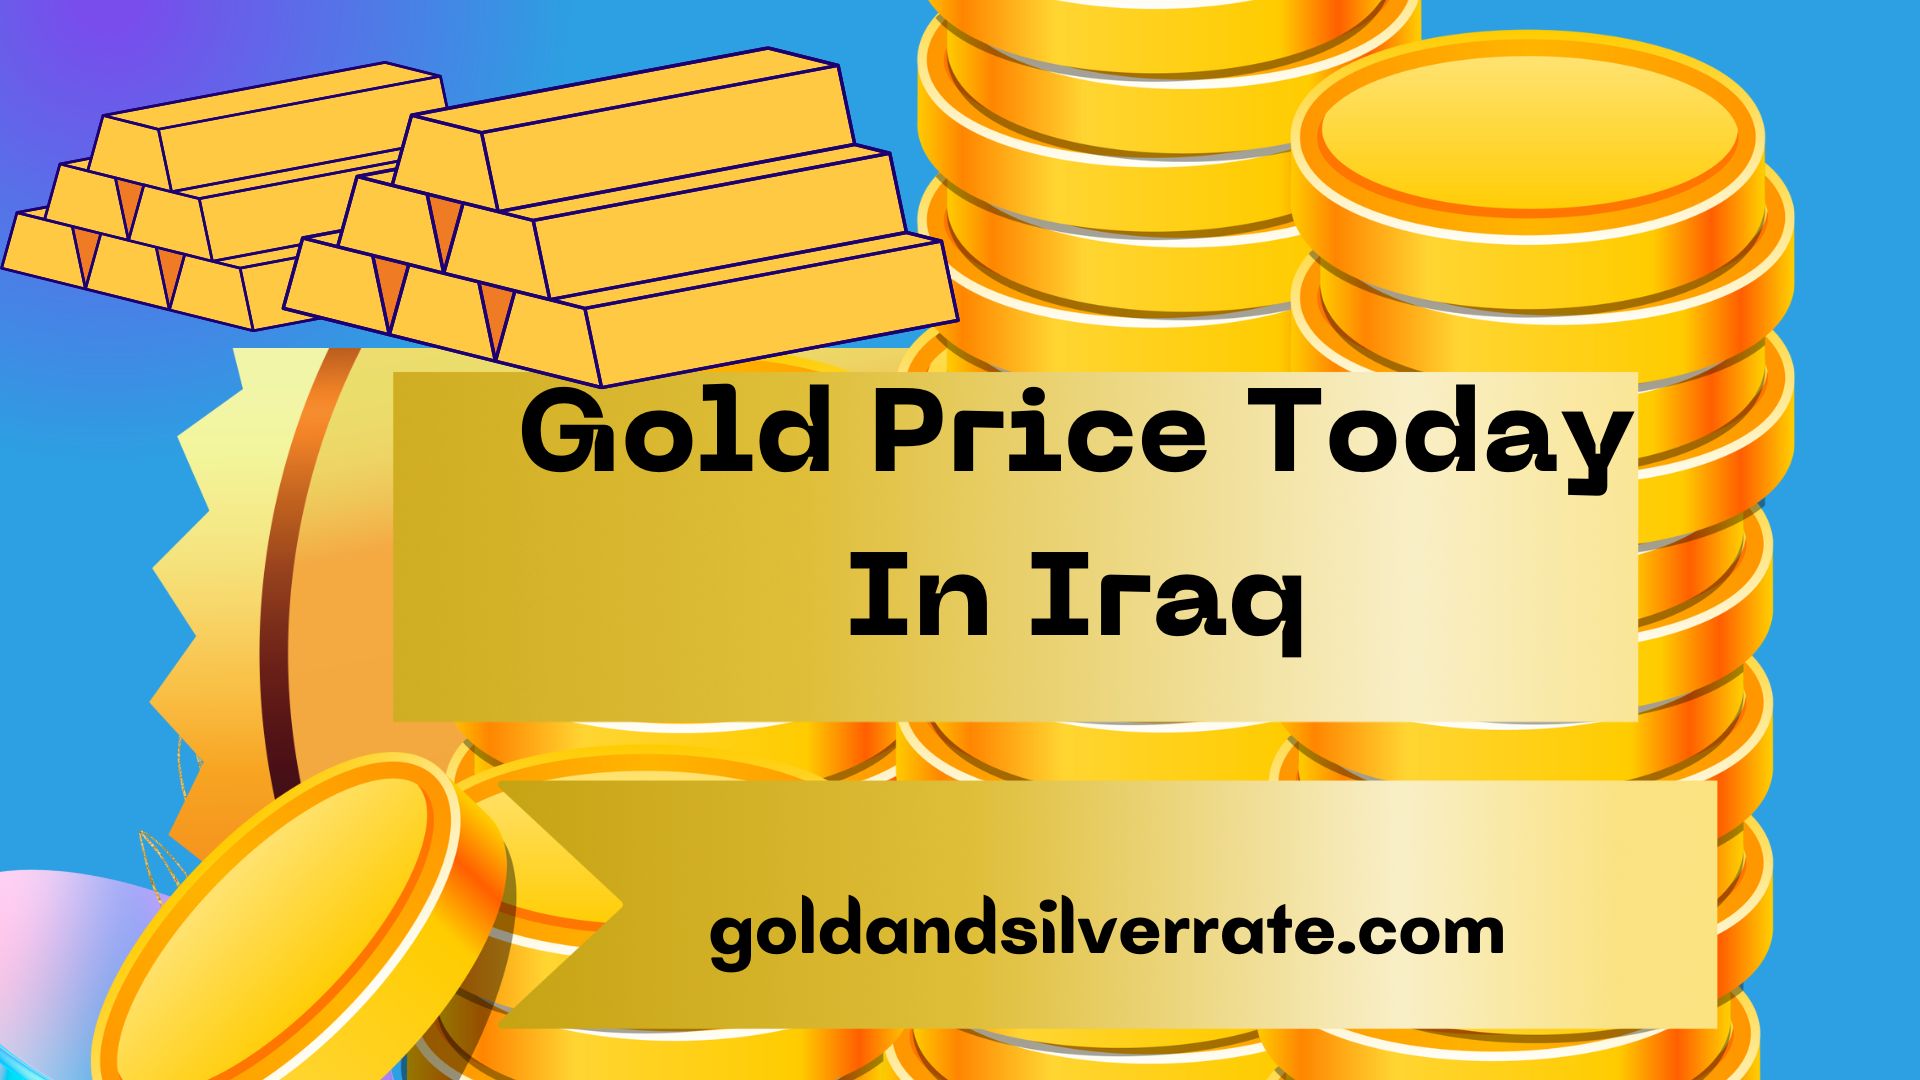 Gold Price Today In Iraq